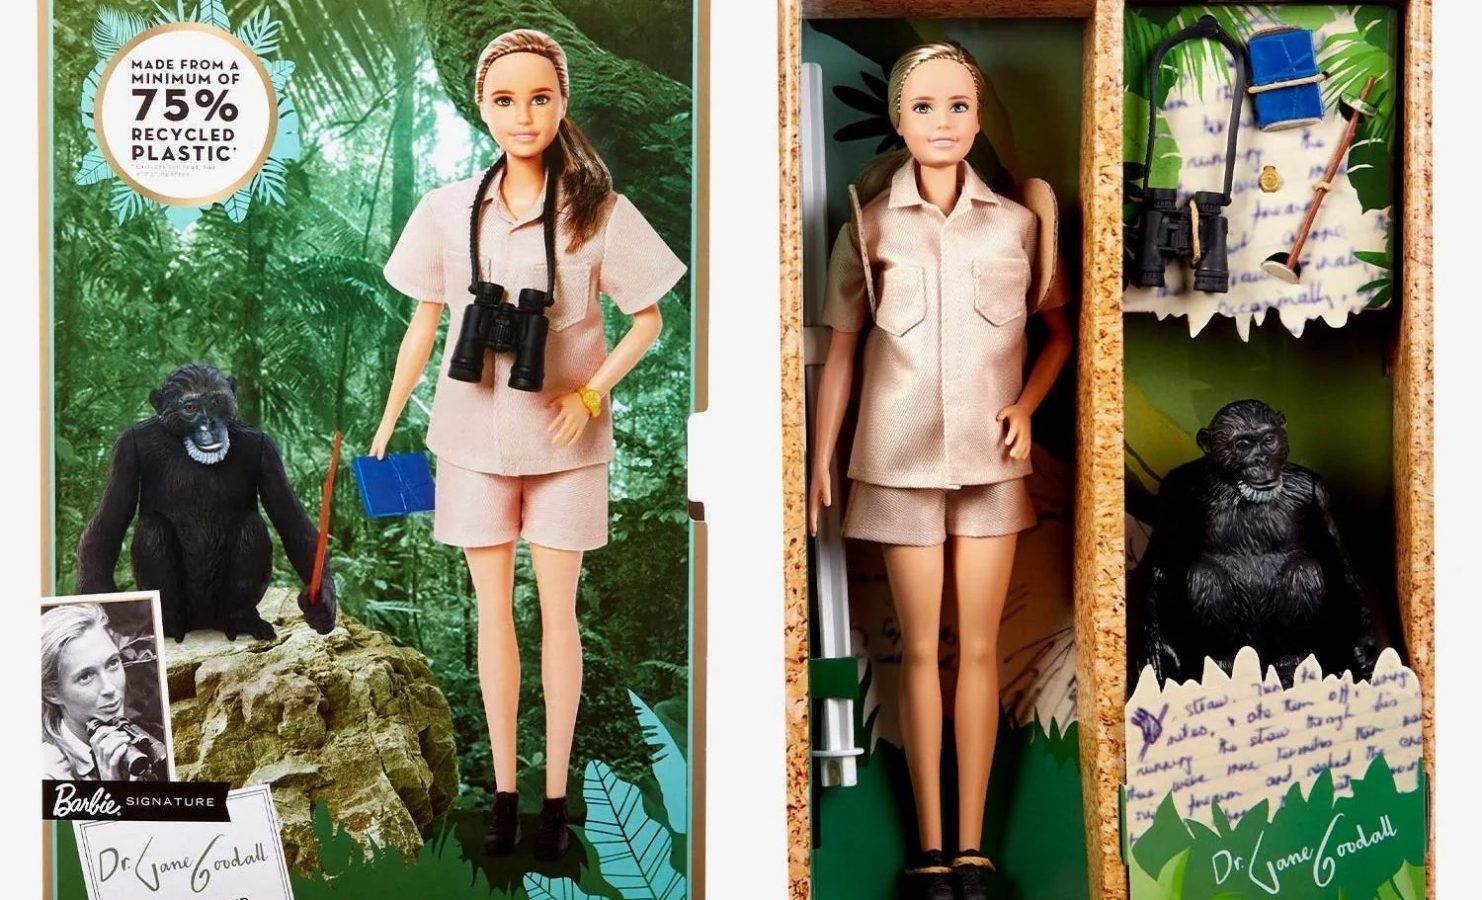 There is now a Jane Goodall Barbie doll modelled after the famed primatologist